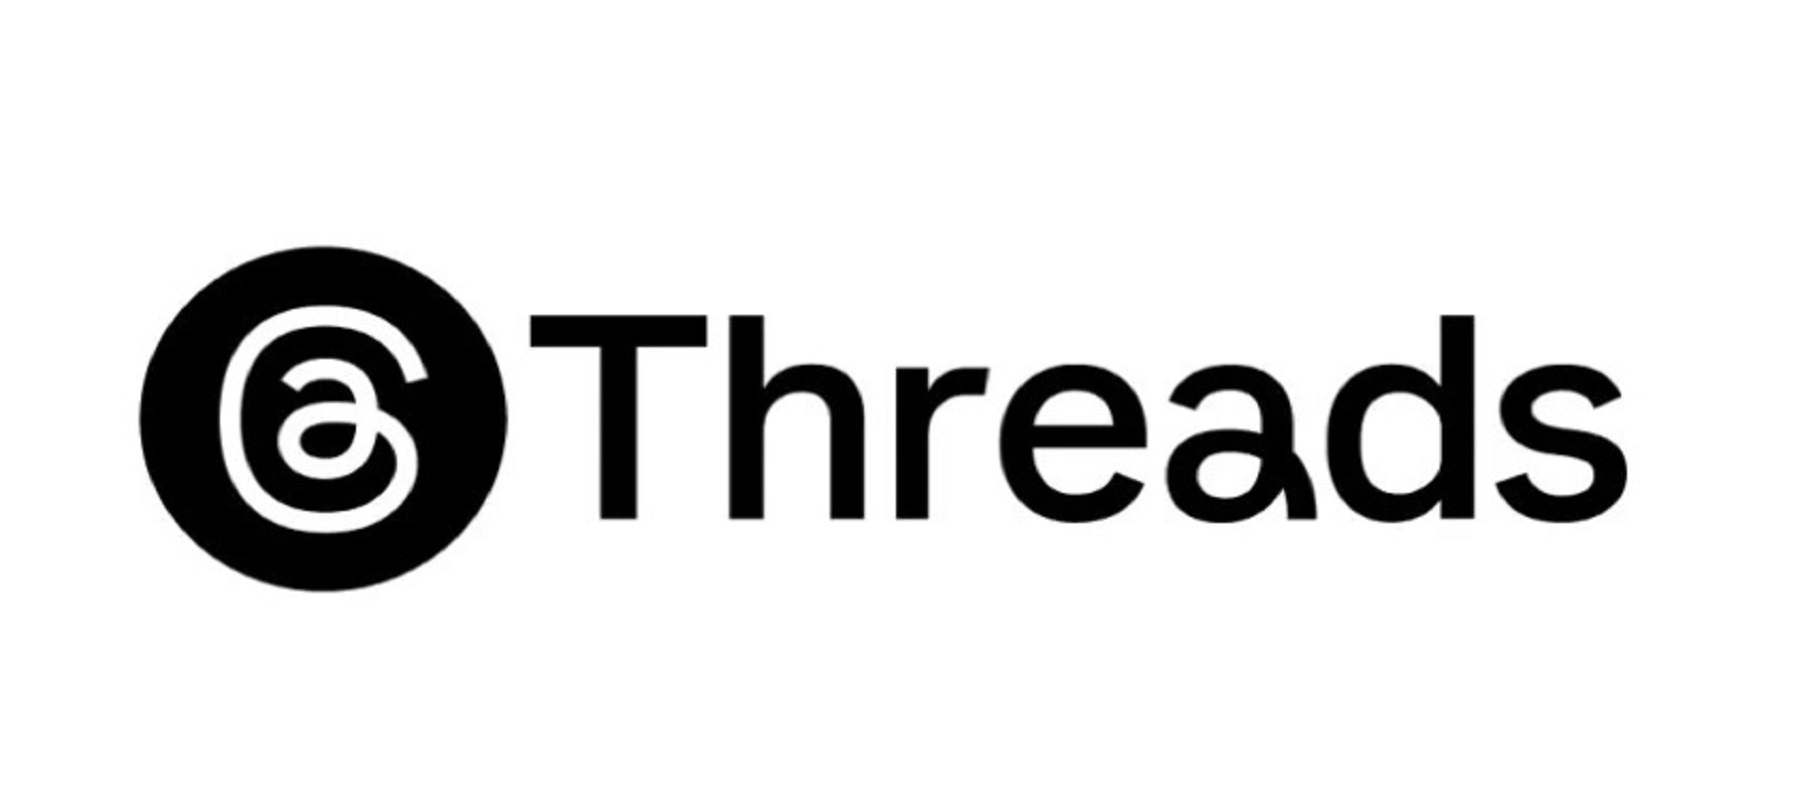 80 per cent of marketers likely to try Threads, report